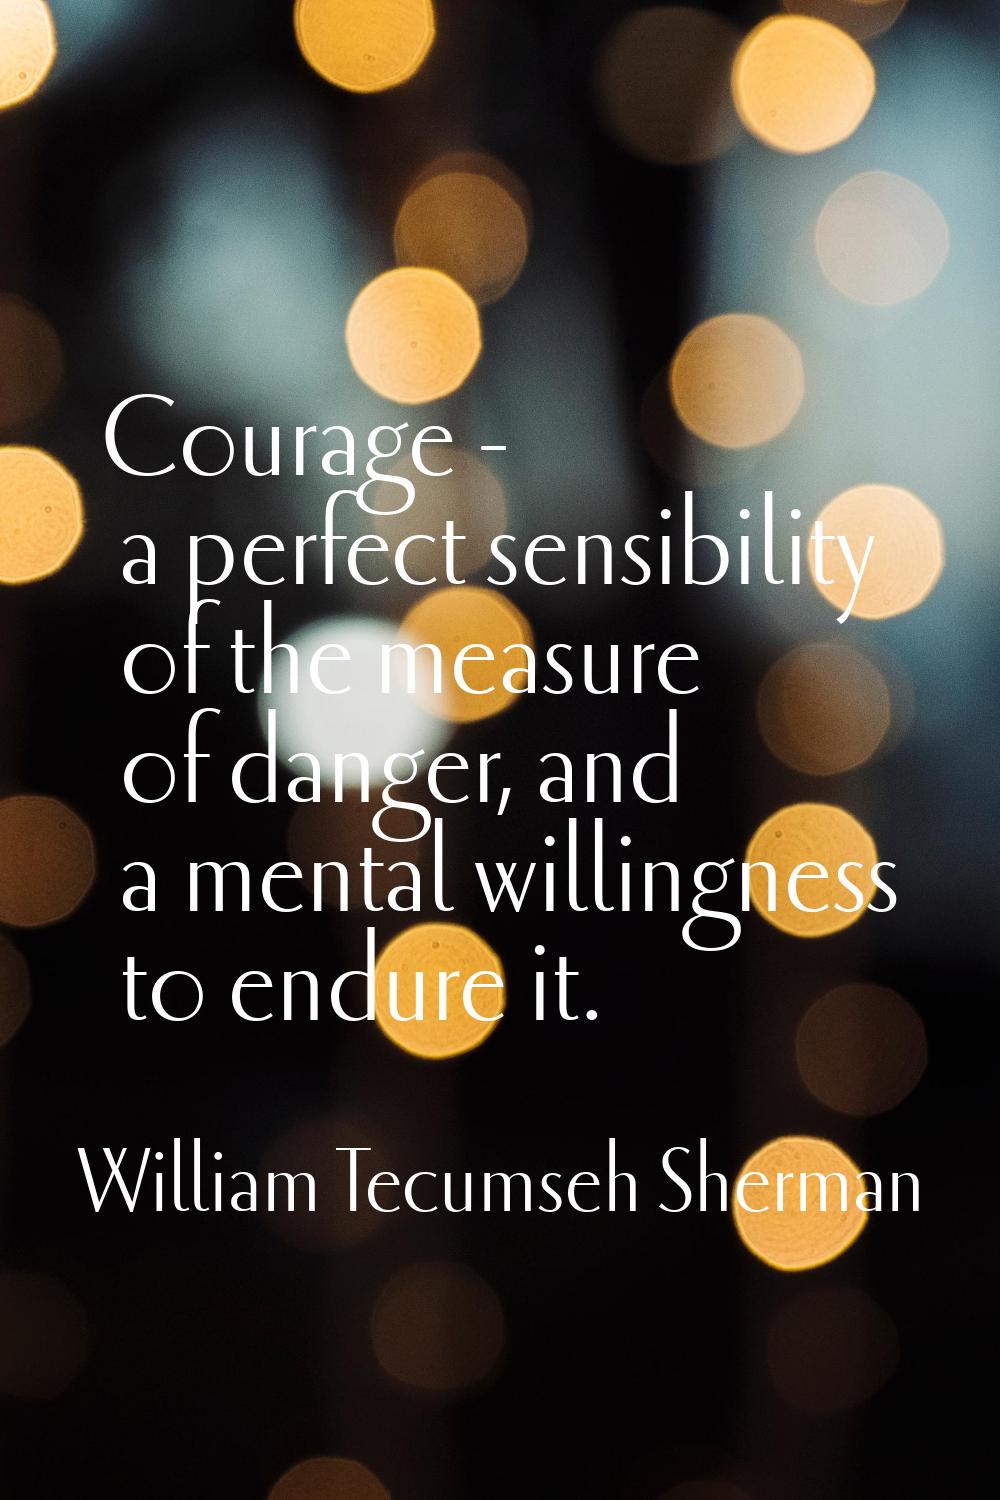 Courage - a perfect sensibility of the measure of danger, and a mental willingness to endure it.